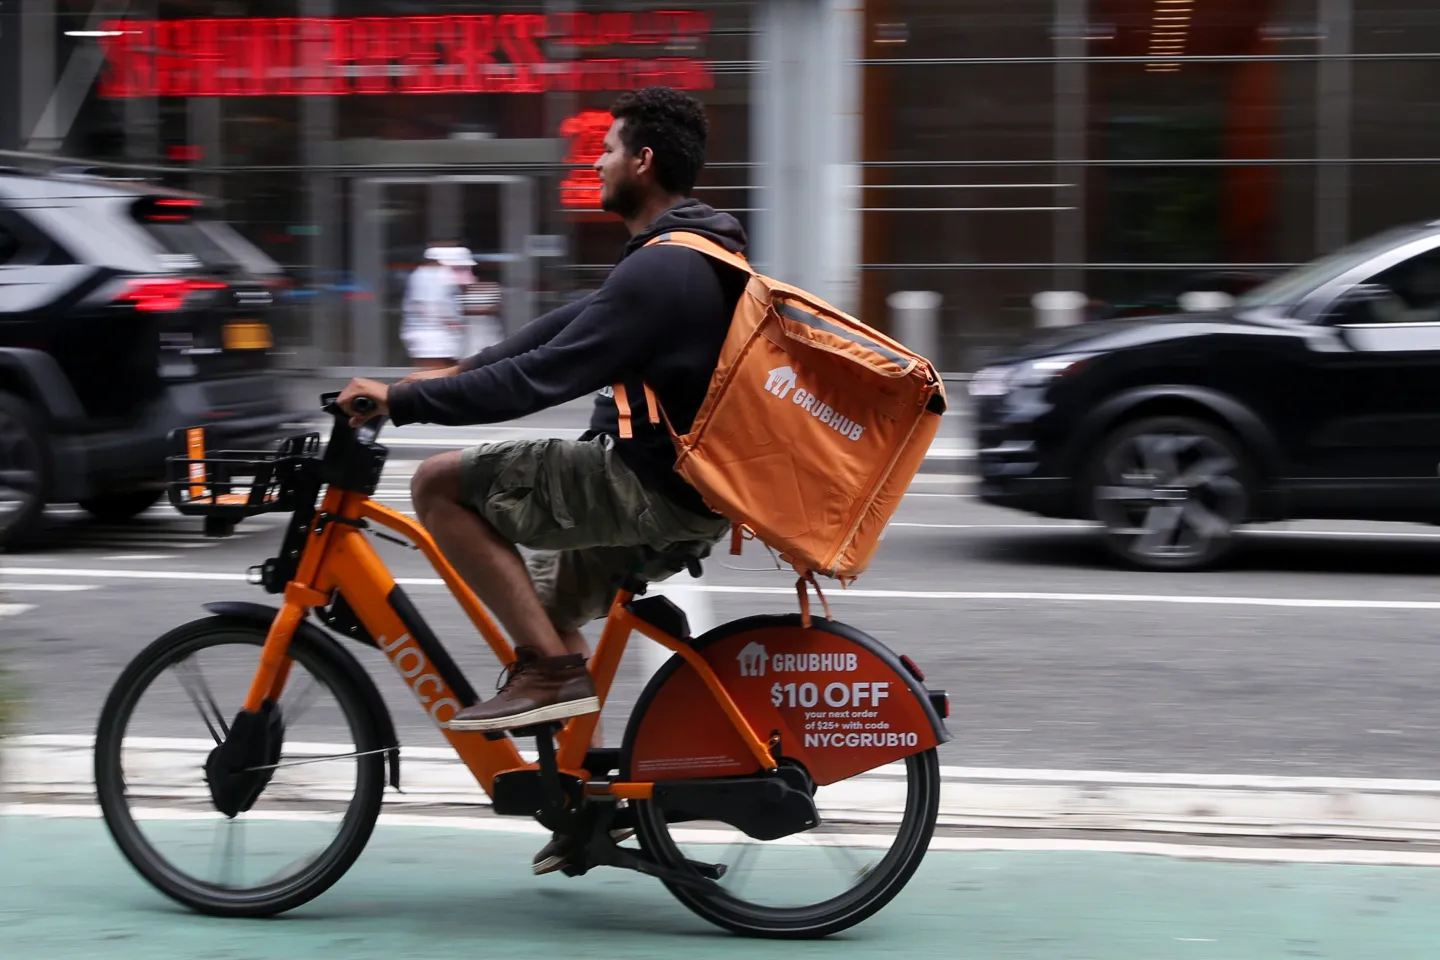 Food delivery apps continue to push back against minimum pay rules.